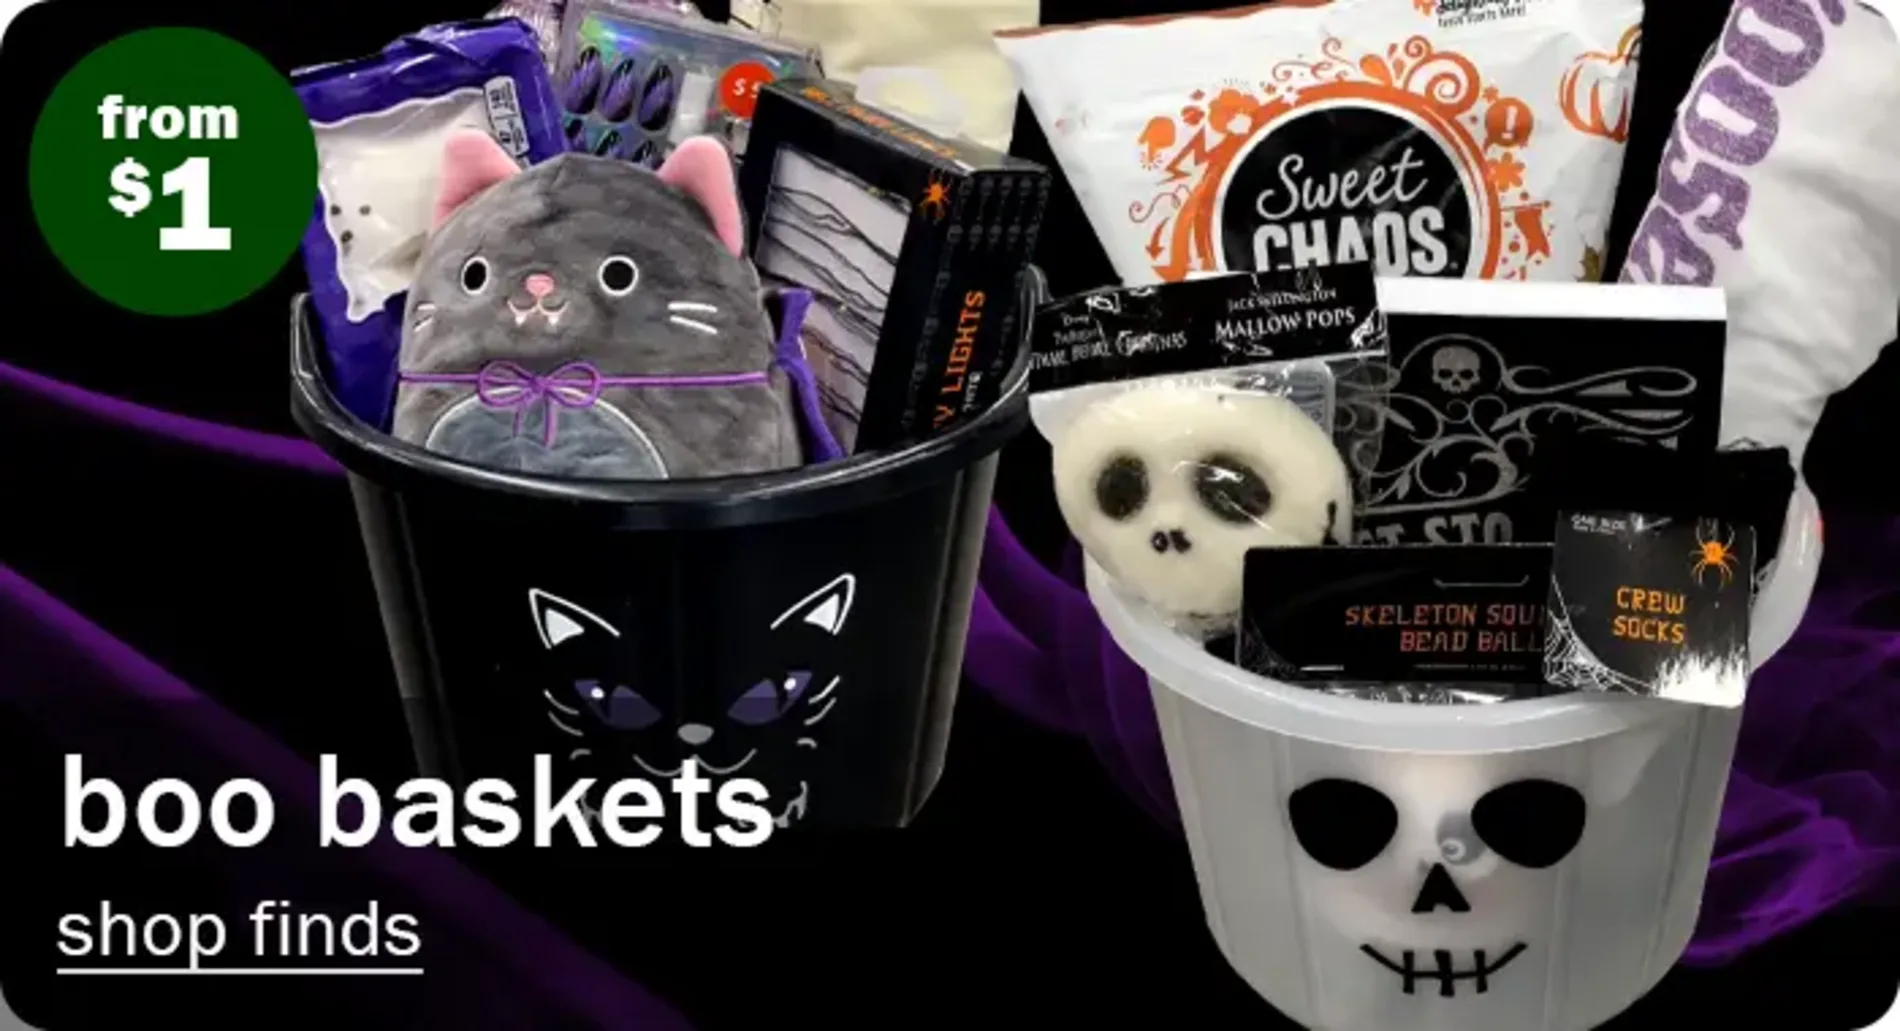 boo baskets. Shop Finds. from $1